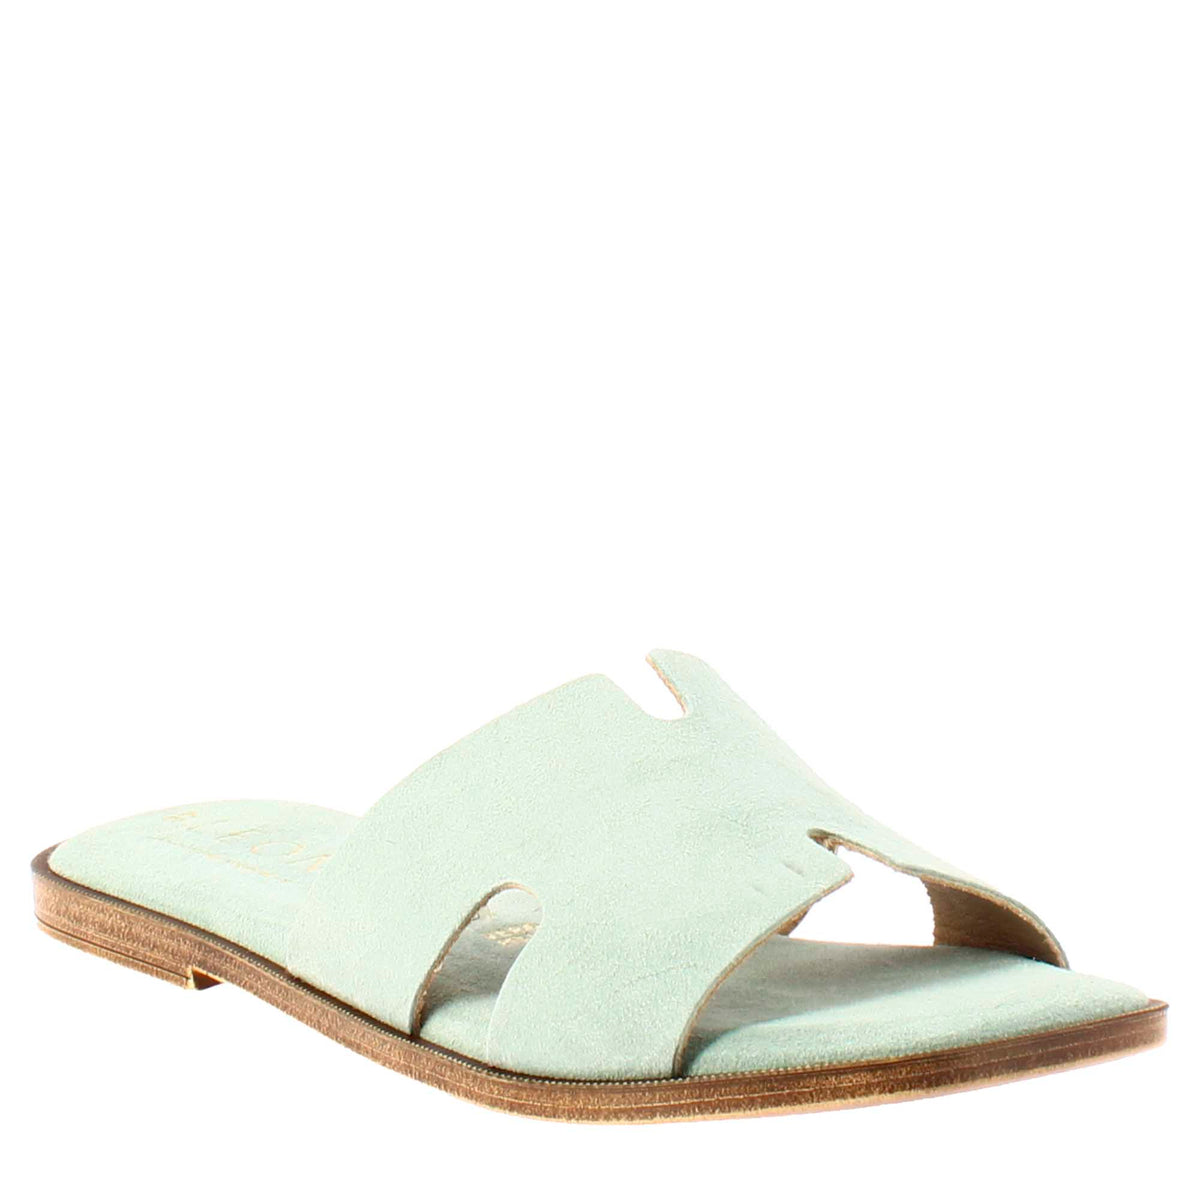 Women's H-shaped sandals in green suede leather